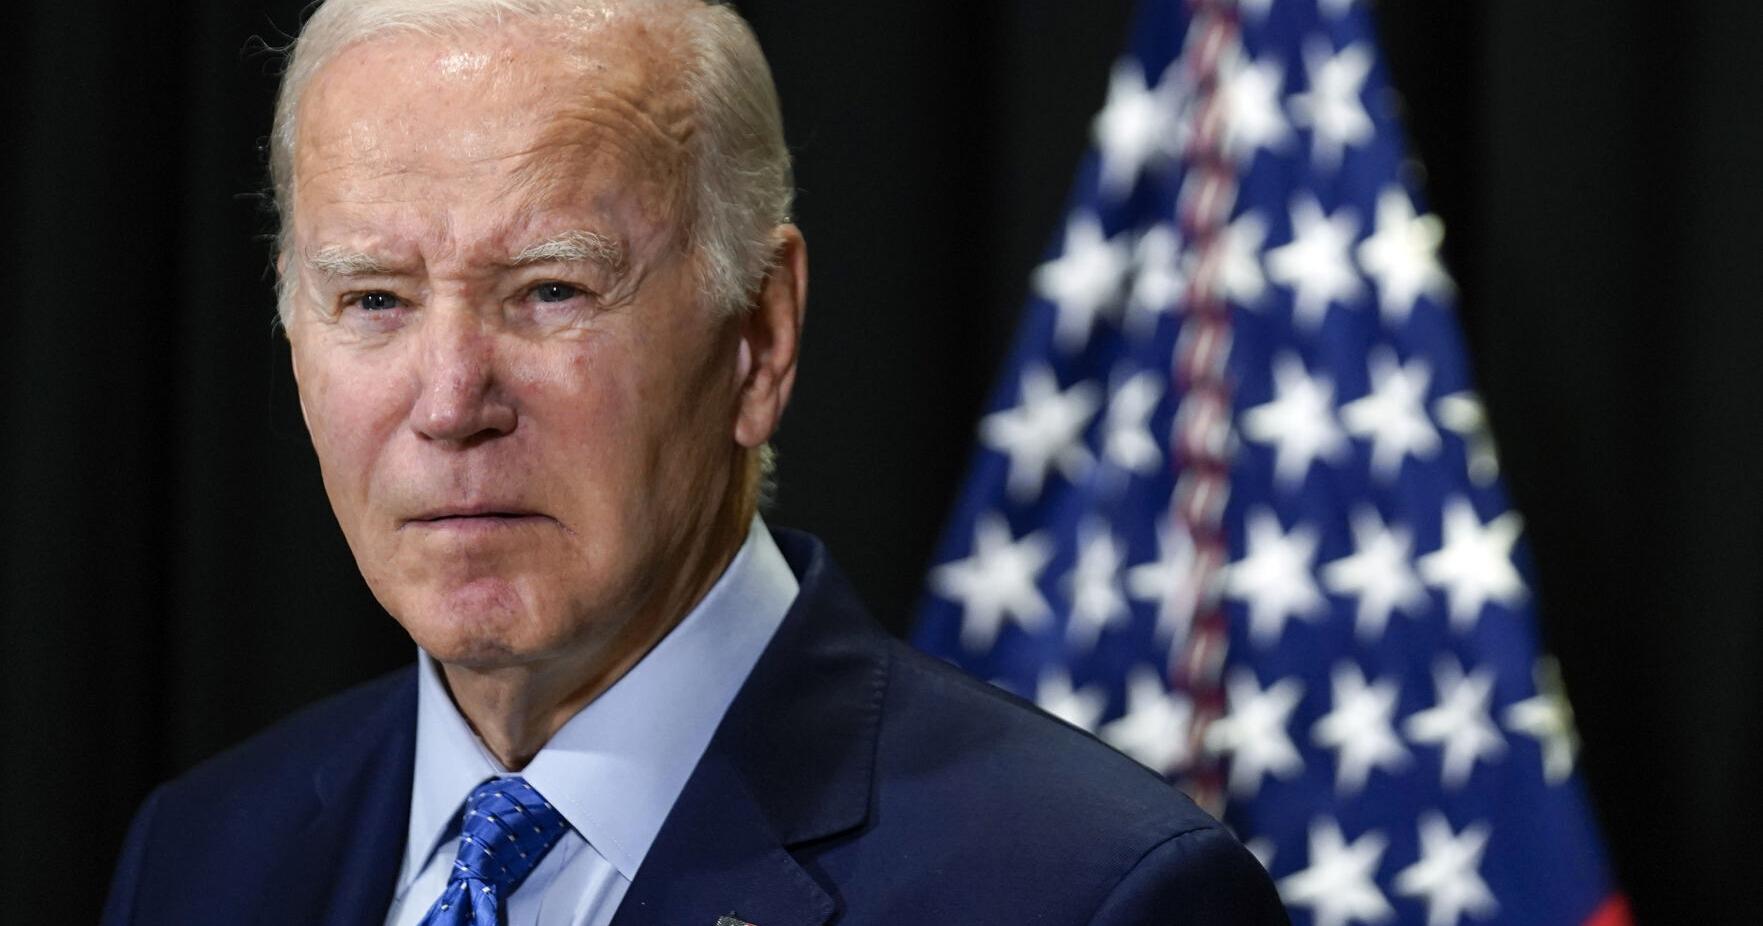 Letter: Biden should get credit for many achievements in his term